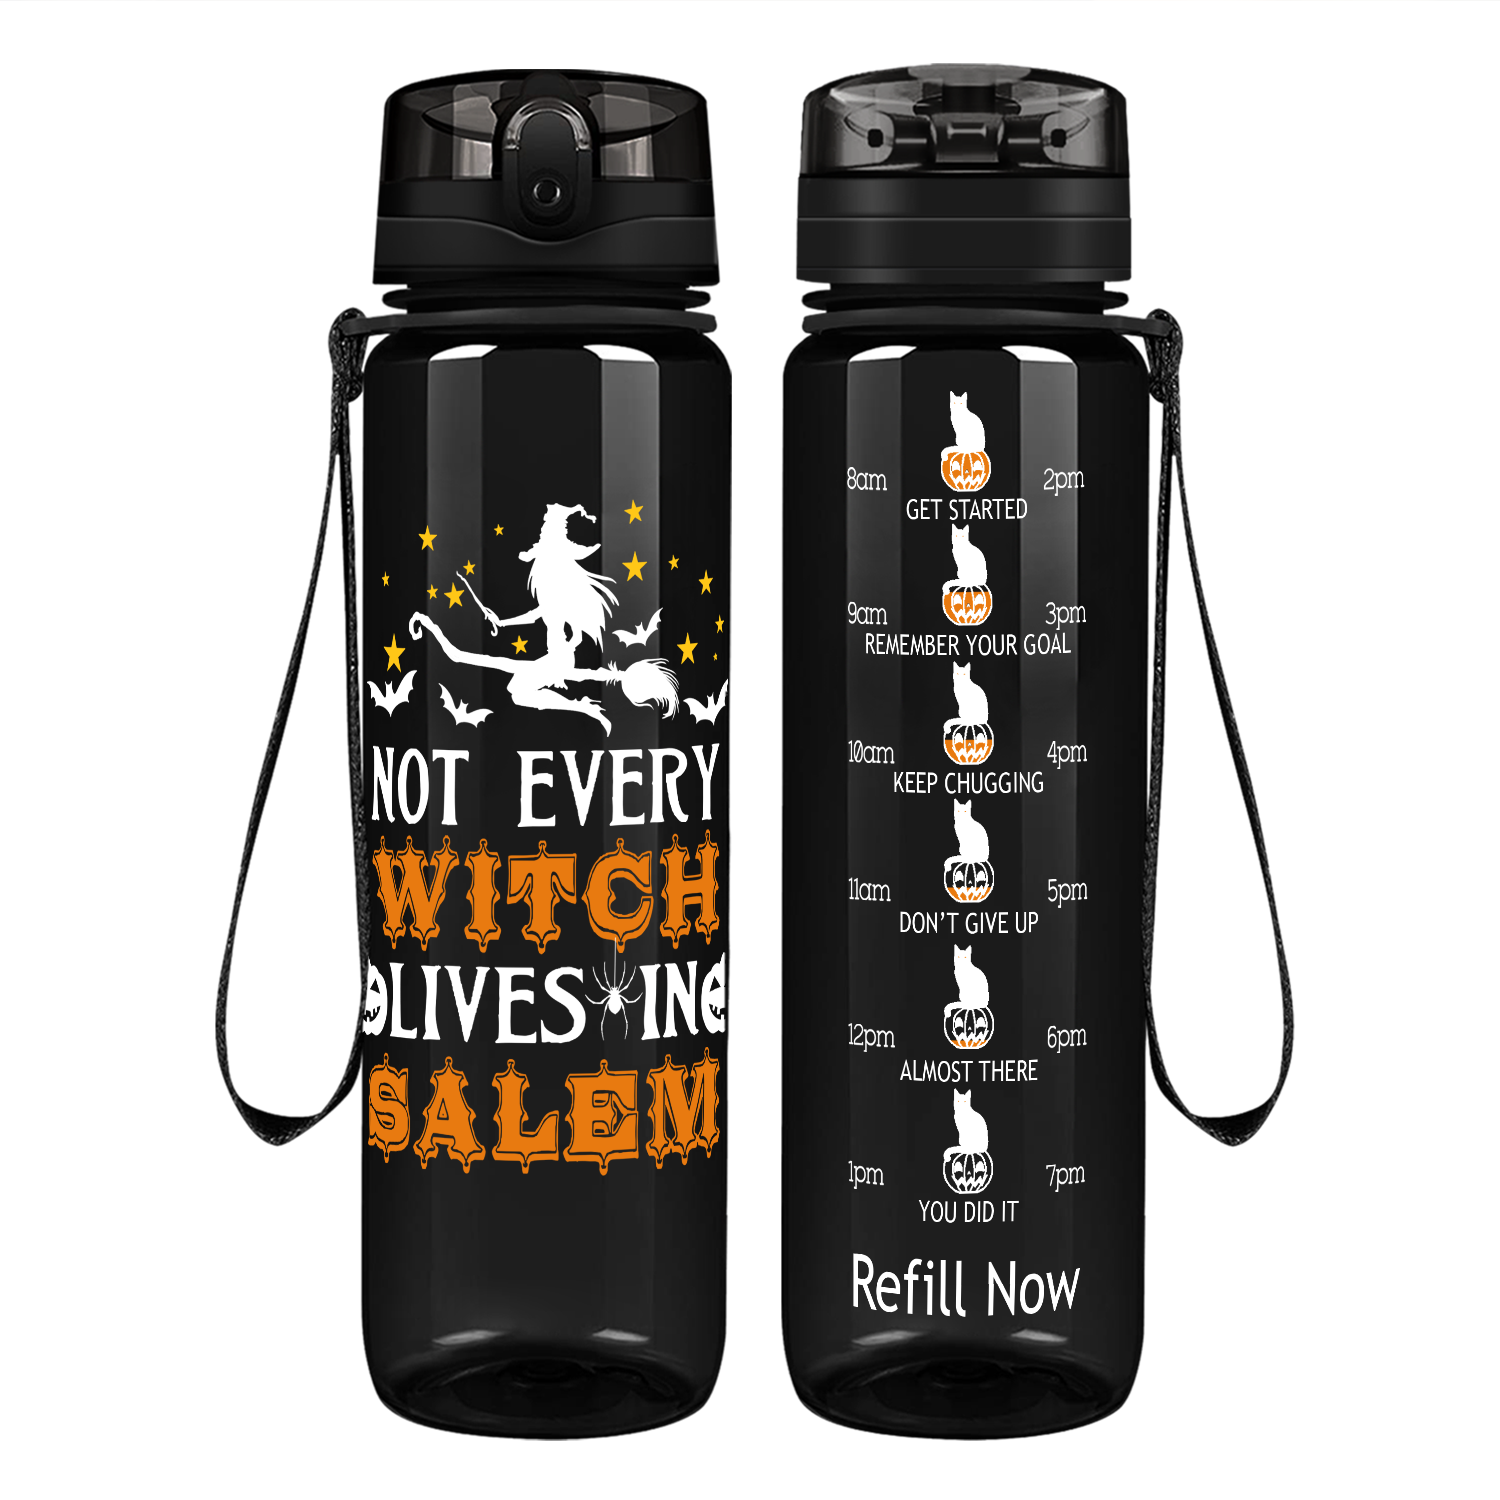 Not Every Witch Lives in Salem on 32 oz Motivational Tracking Water Bottle